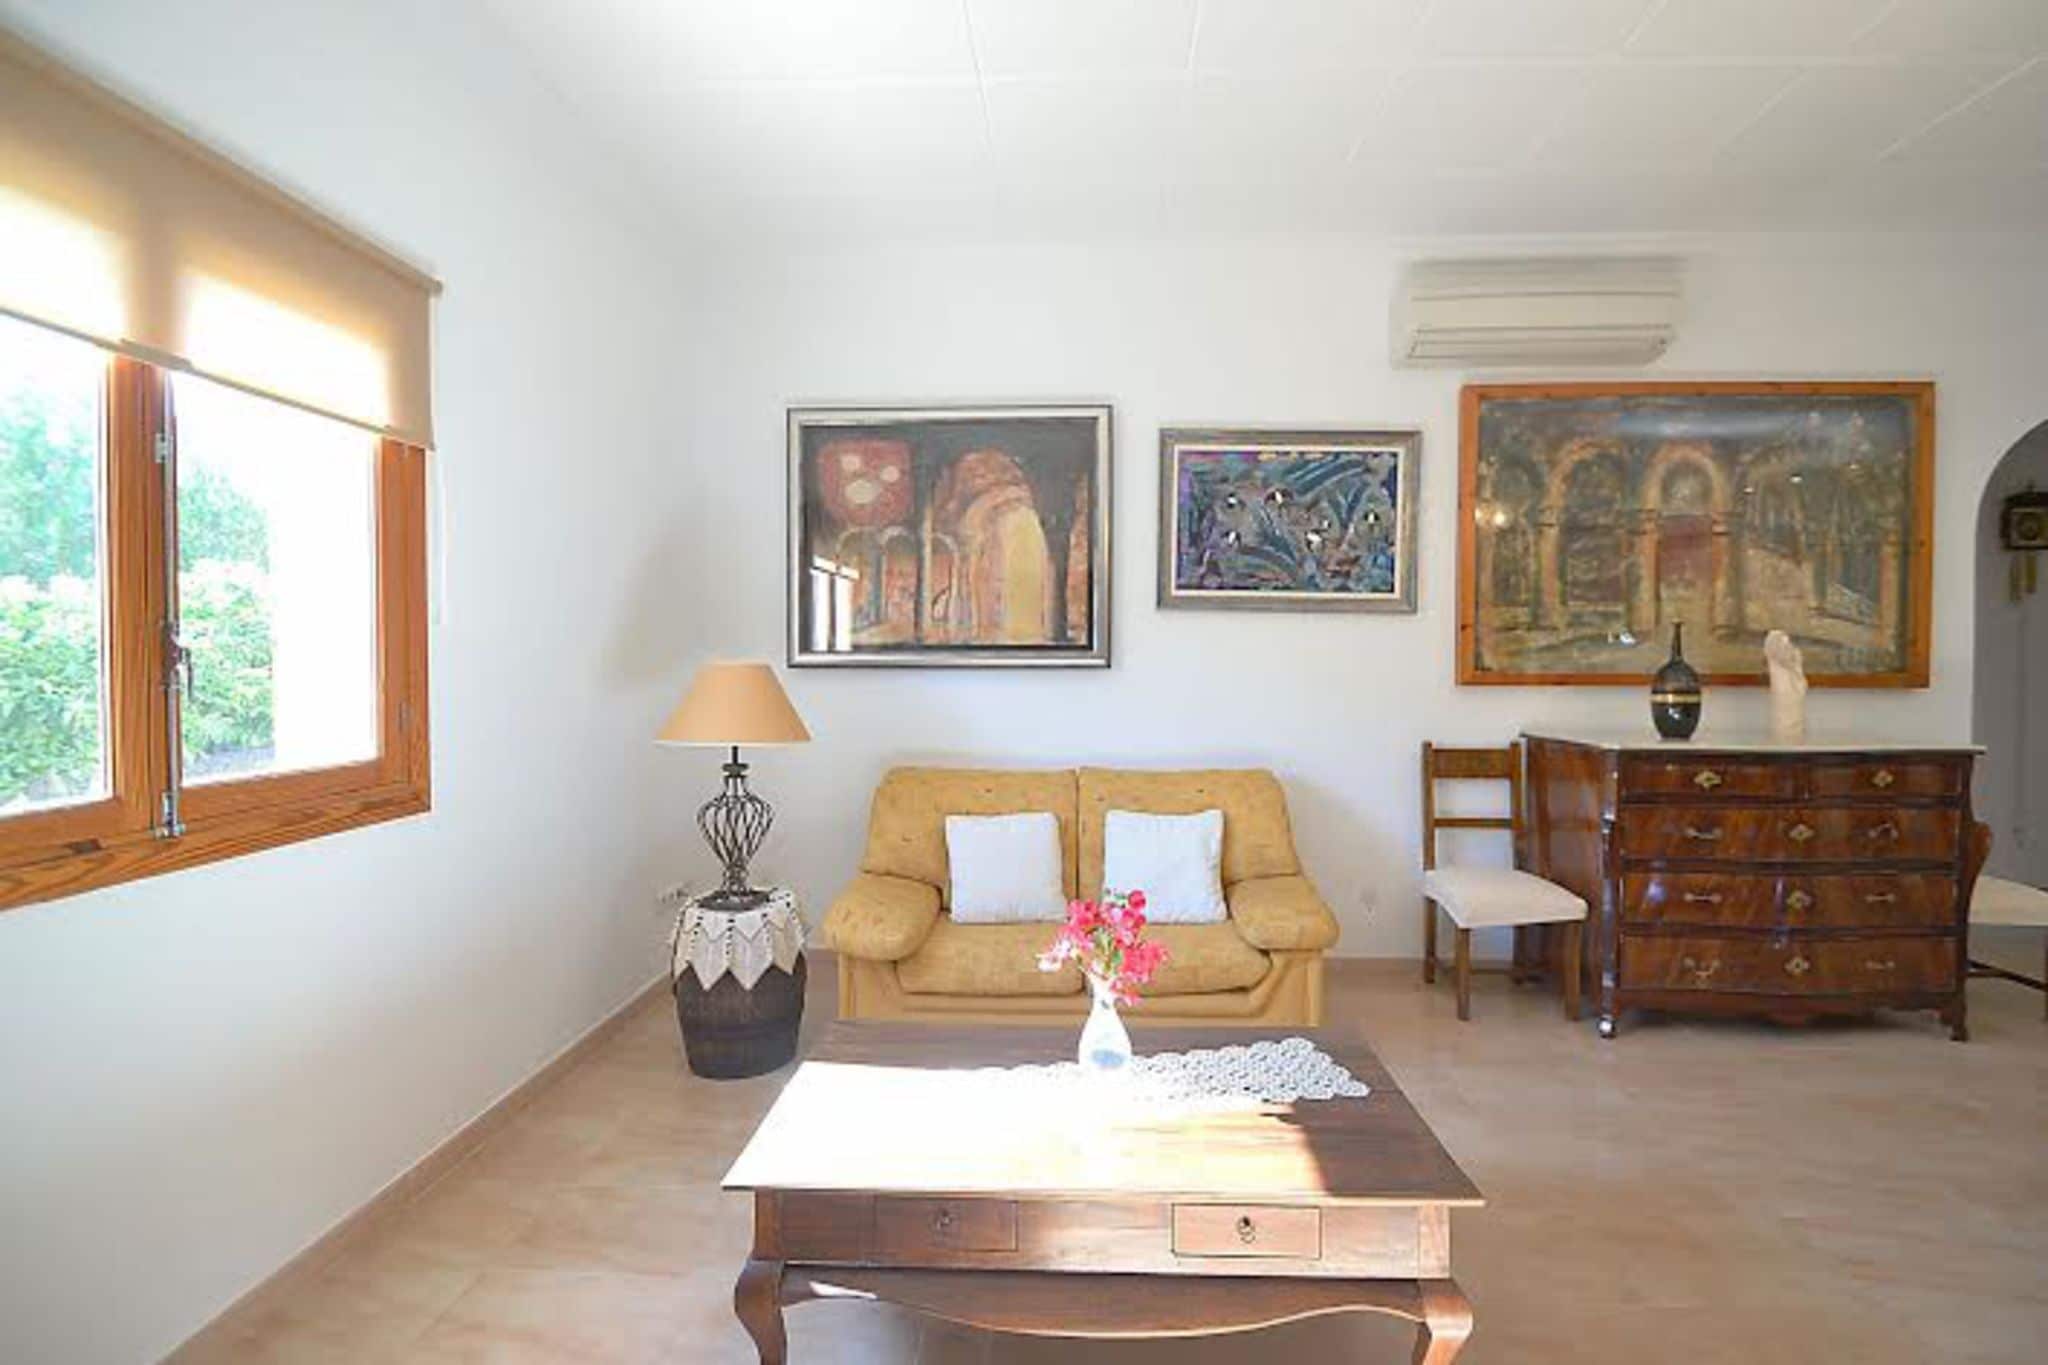 Nice villa with pool is located outside the picturesque village of Binissalem